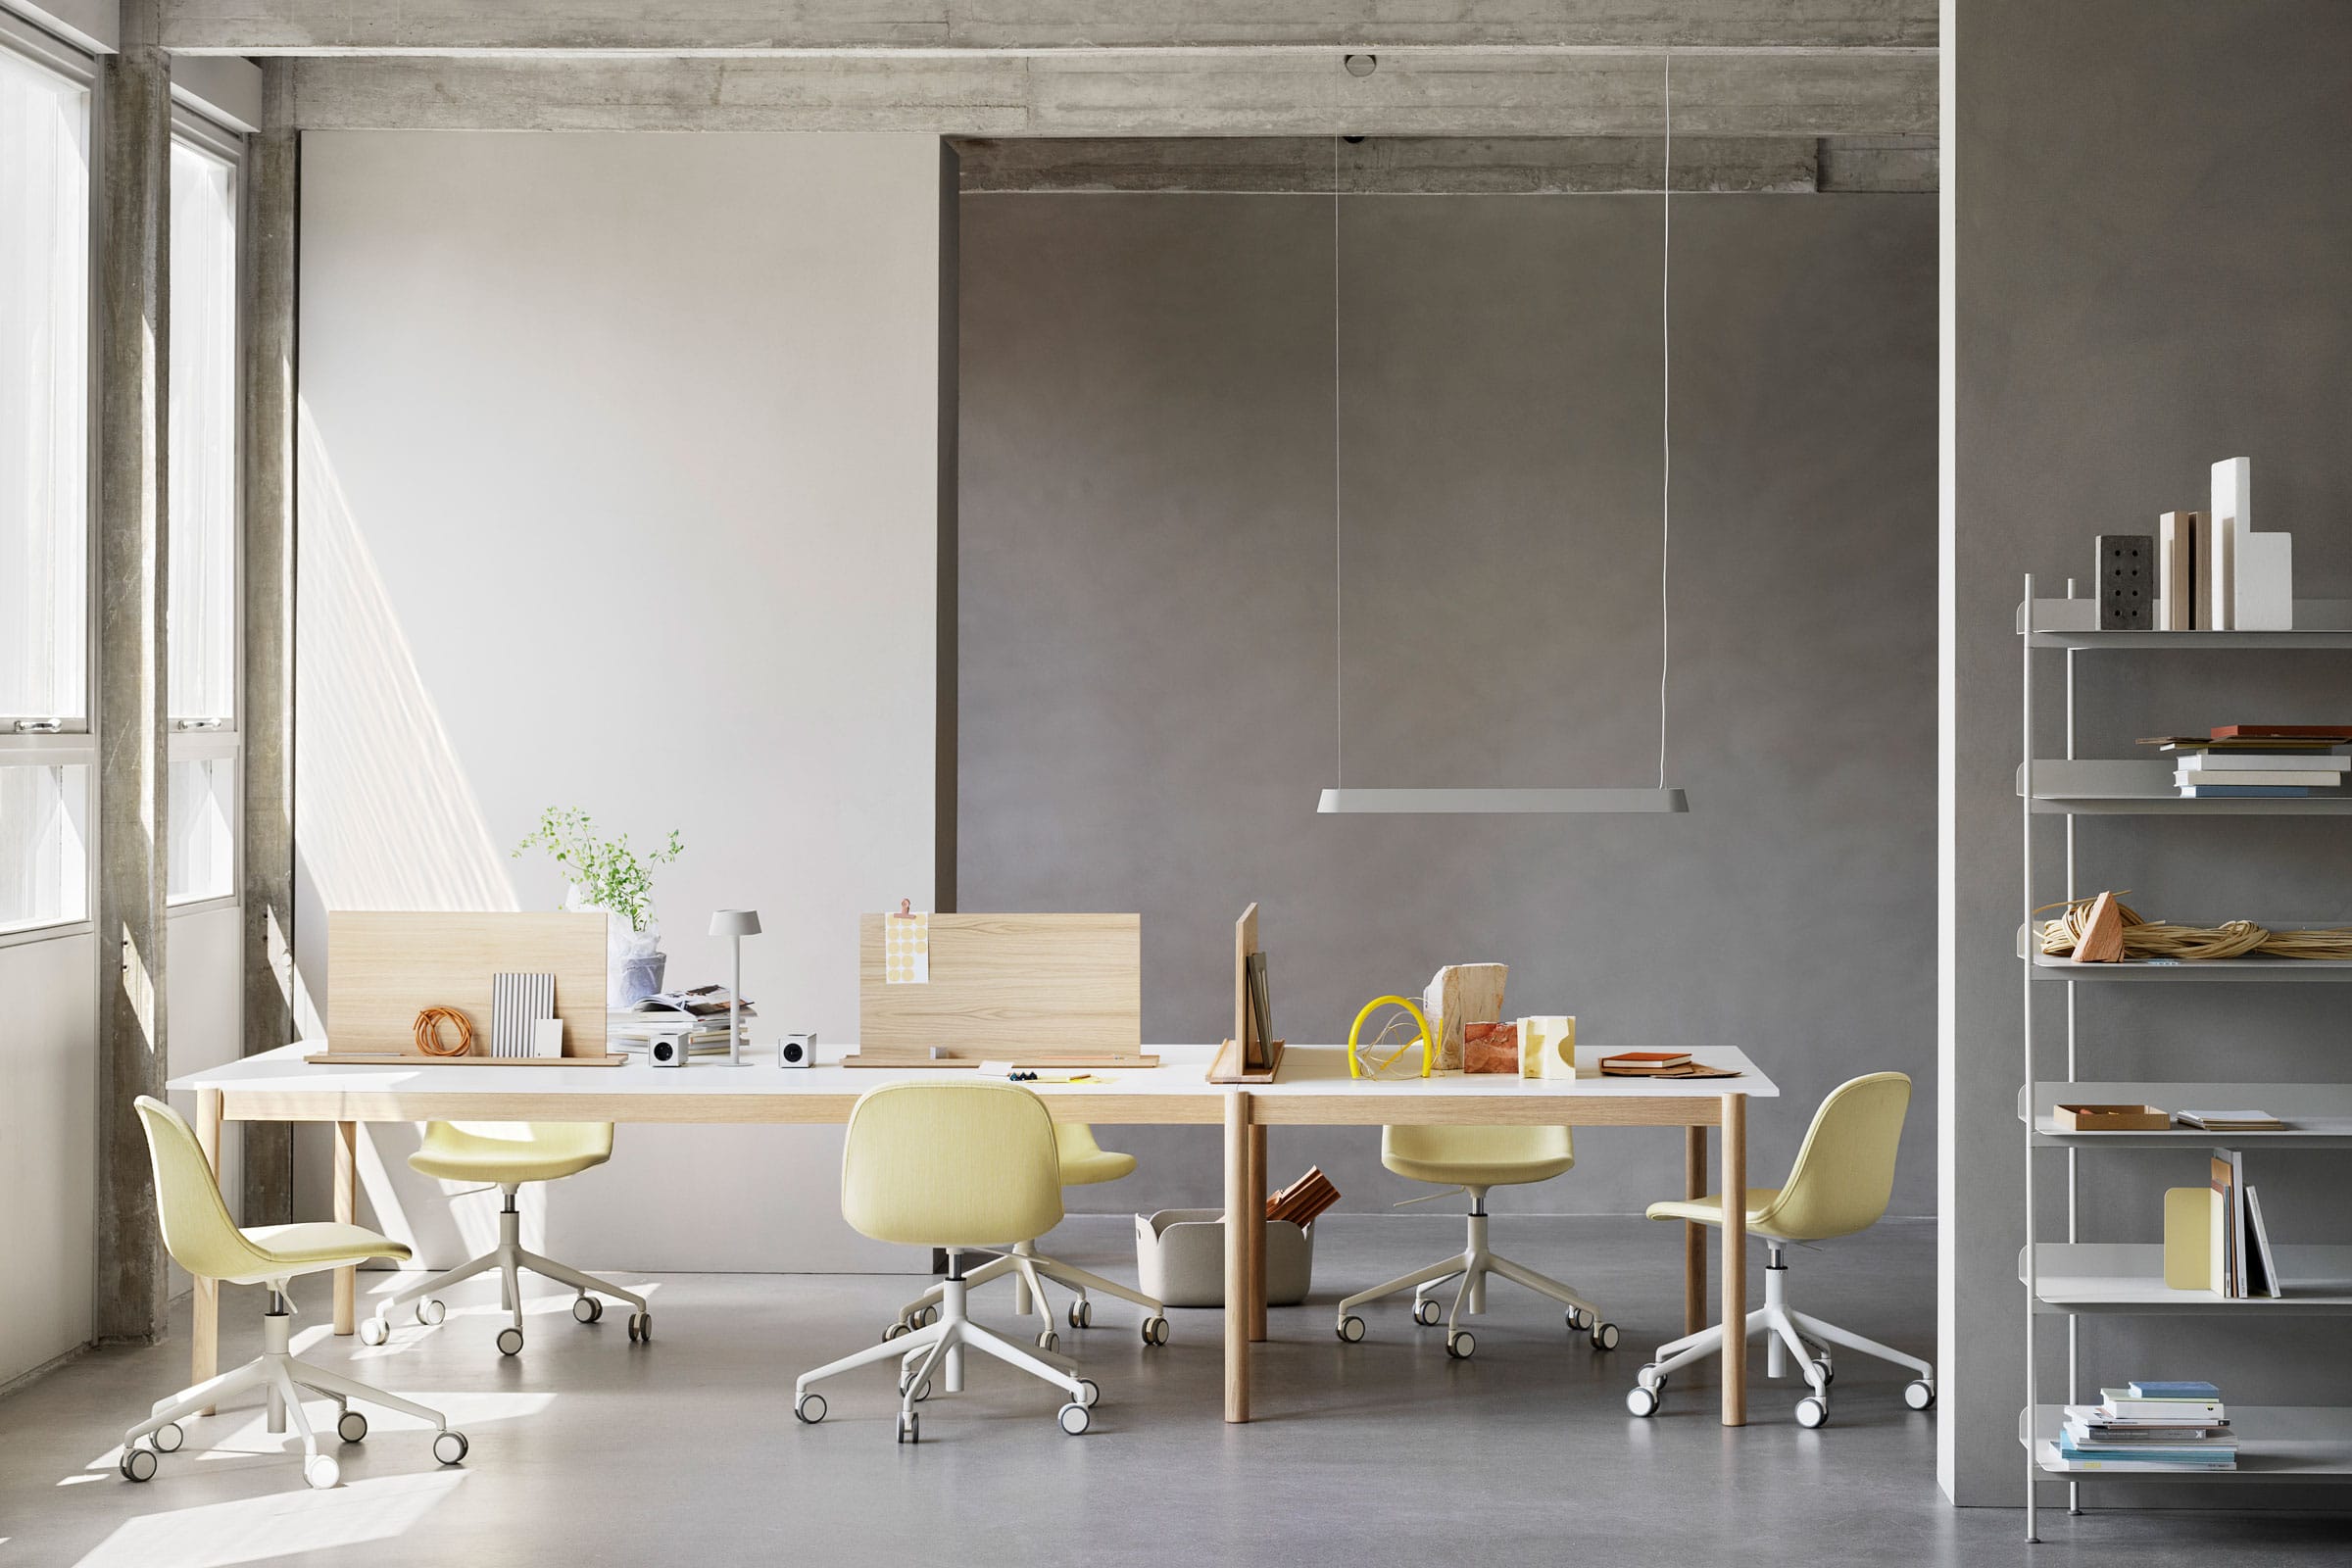 Muuto’s Workplace Design Uses Light to Manipulate Space